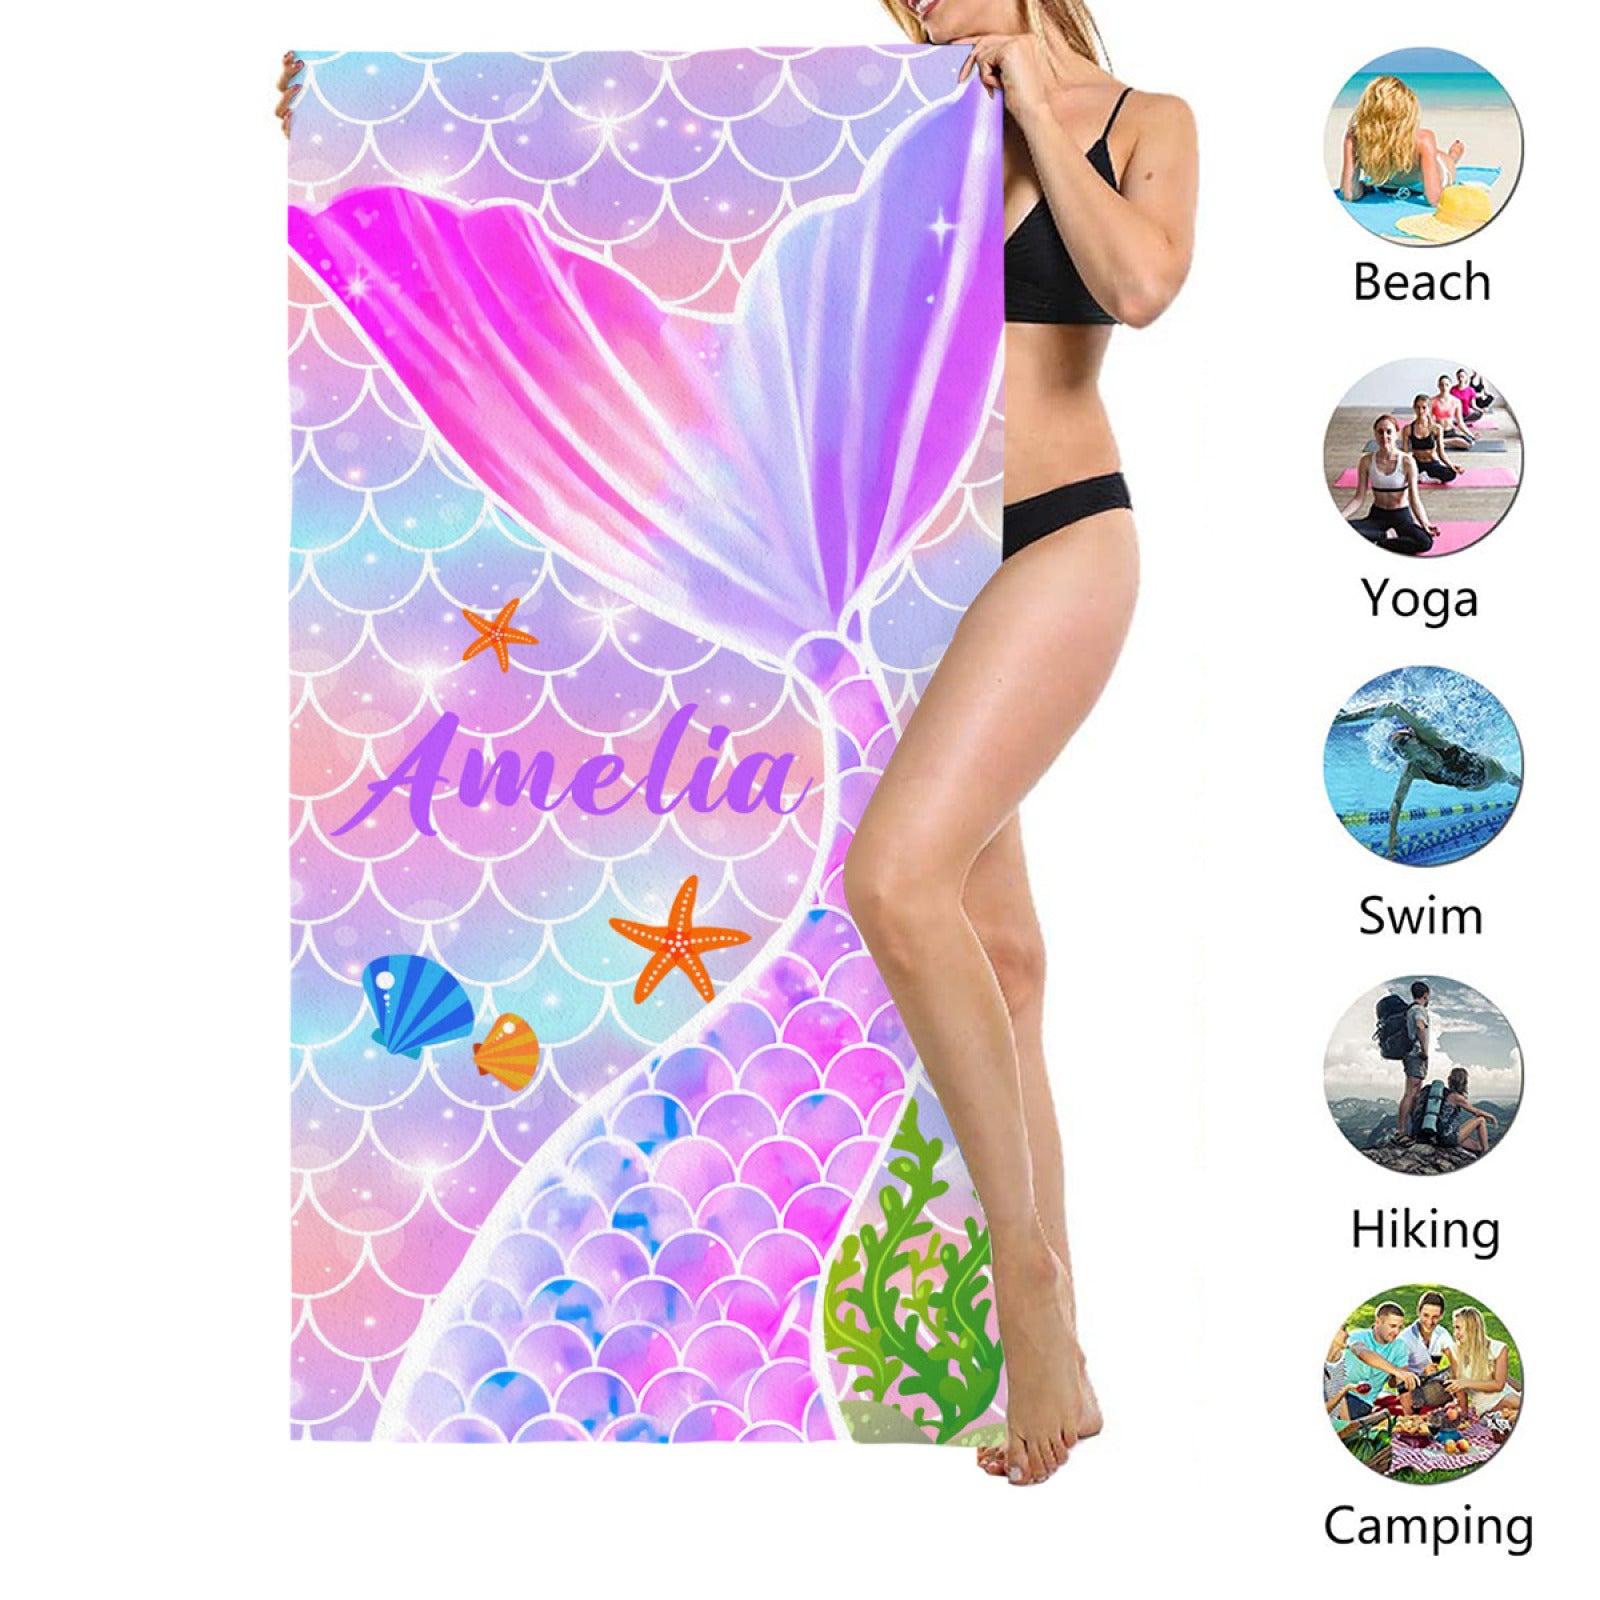 Personalized Mermaid Beach Towels with Name -Scales Beach Towel - Customized Summer Beach Towel - Beach Towel Used as Birthday Gifts - colorfulcustom